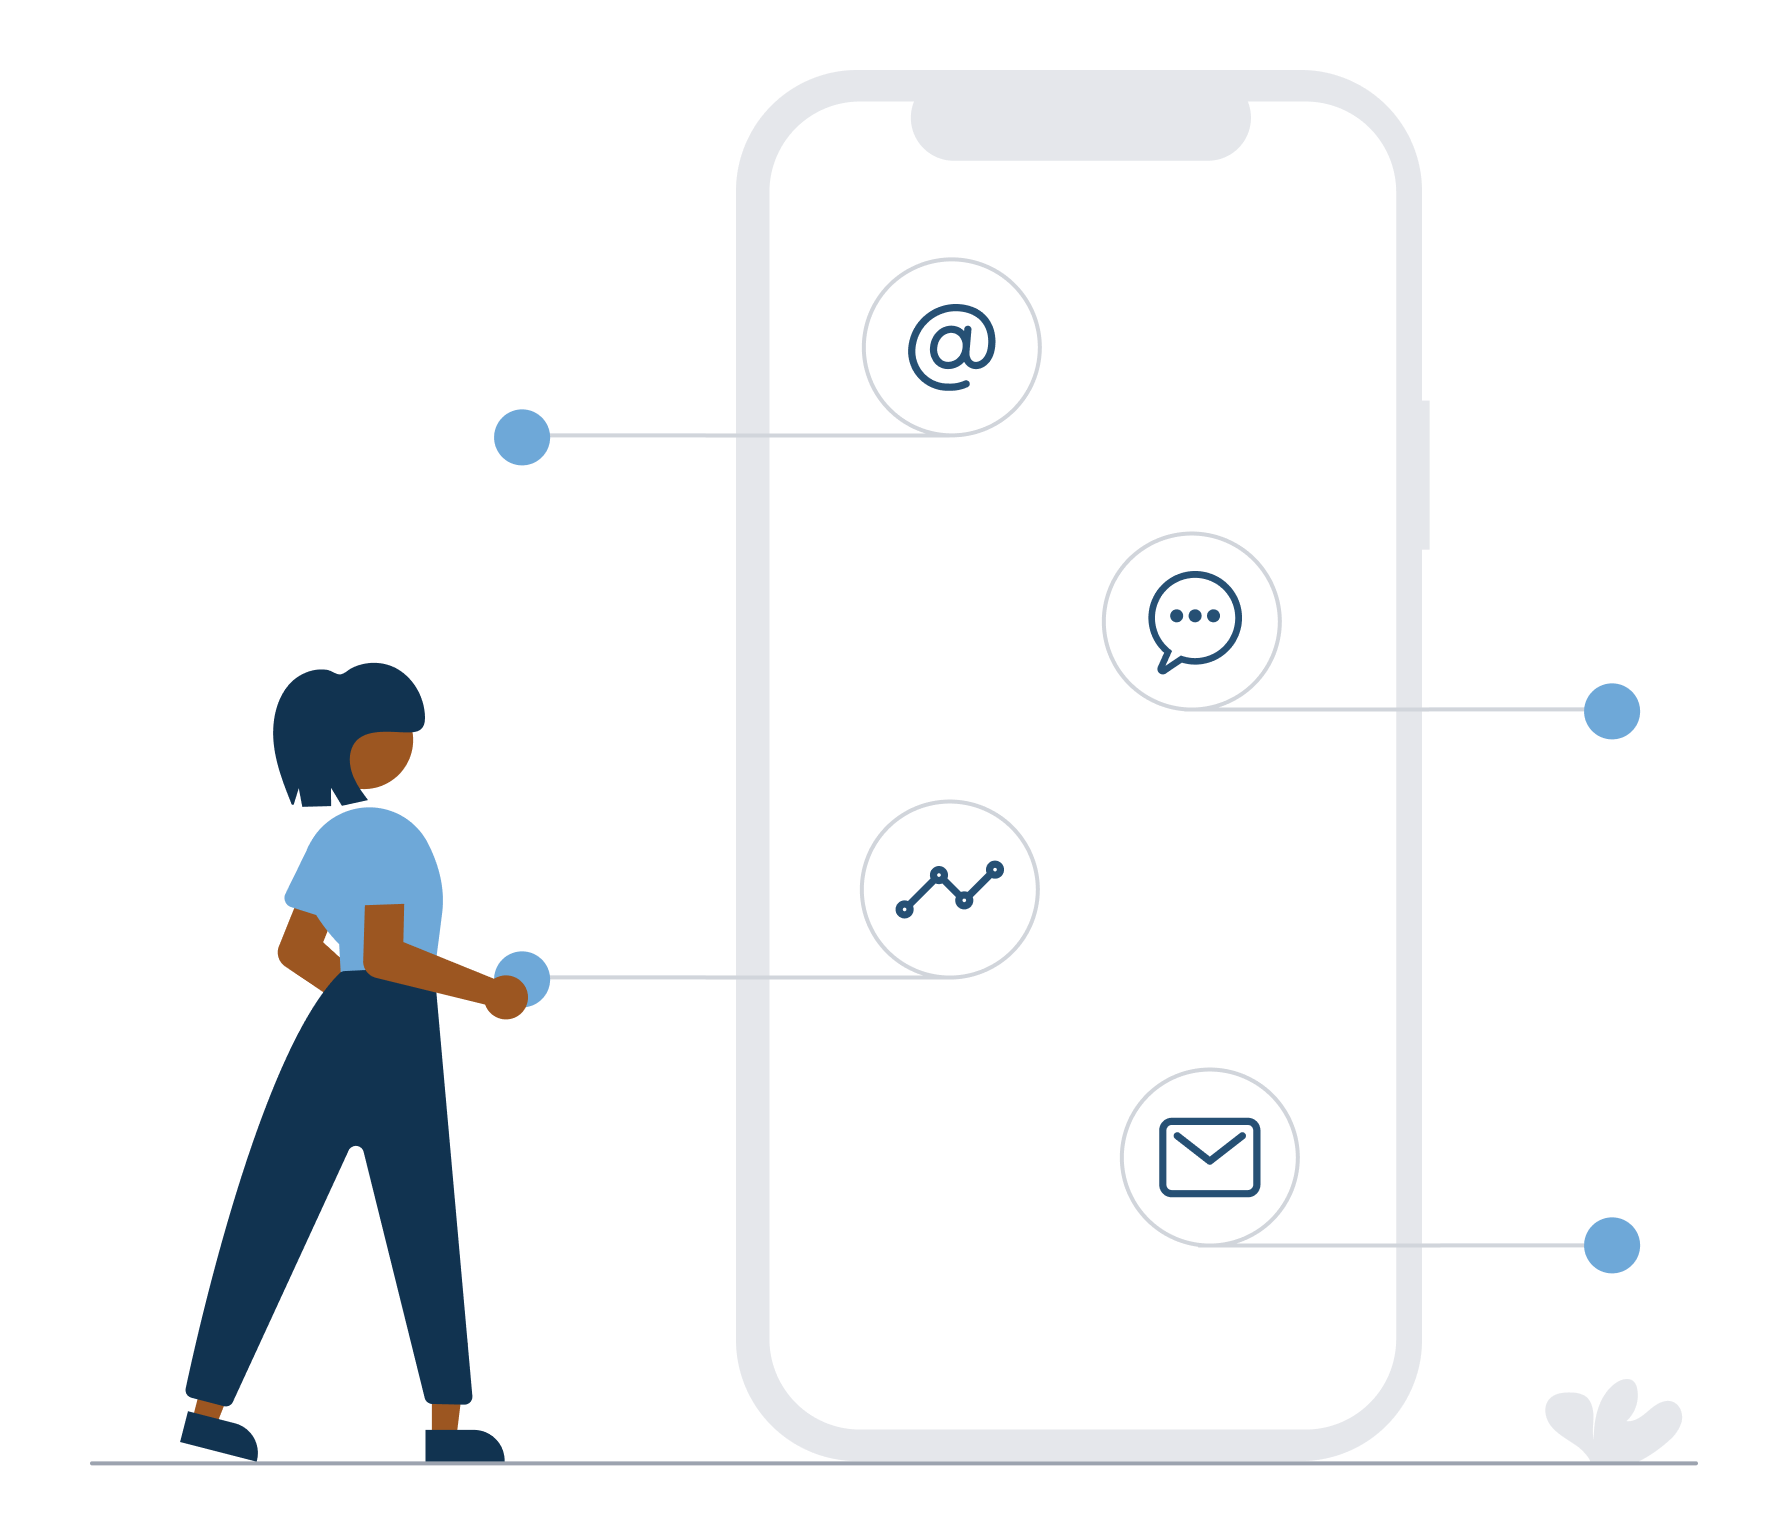 Illustration of a figure looking at a large representation of a smartphone containing symbols for email, chat, charts, and email